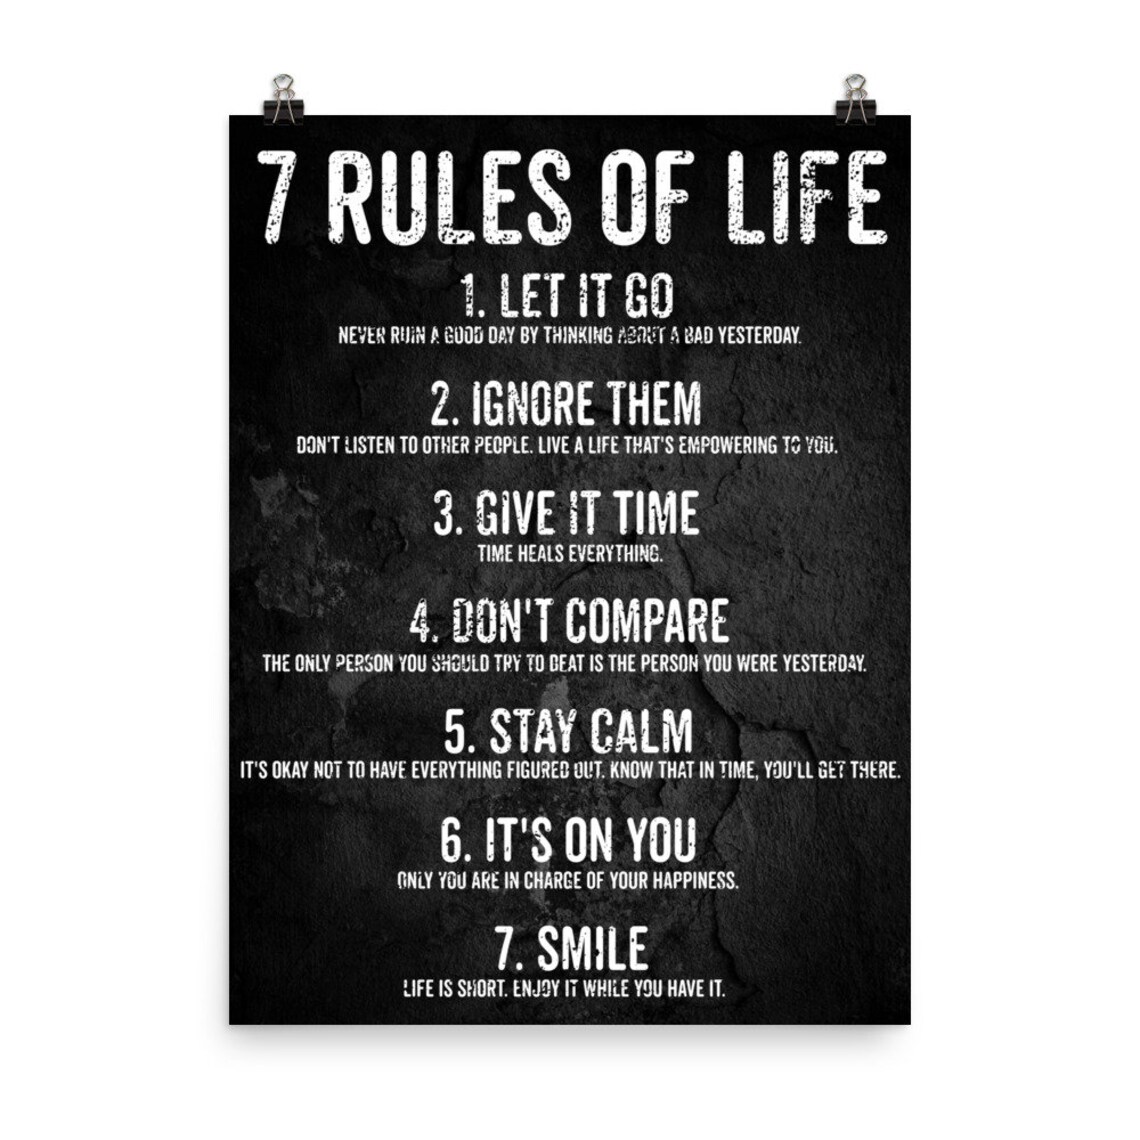 quotes-about-life-7-rules-of-life-motivational-poster-print-etsy